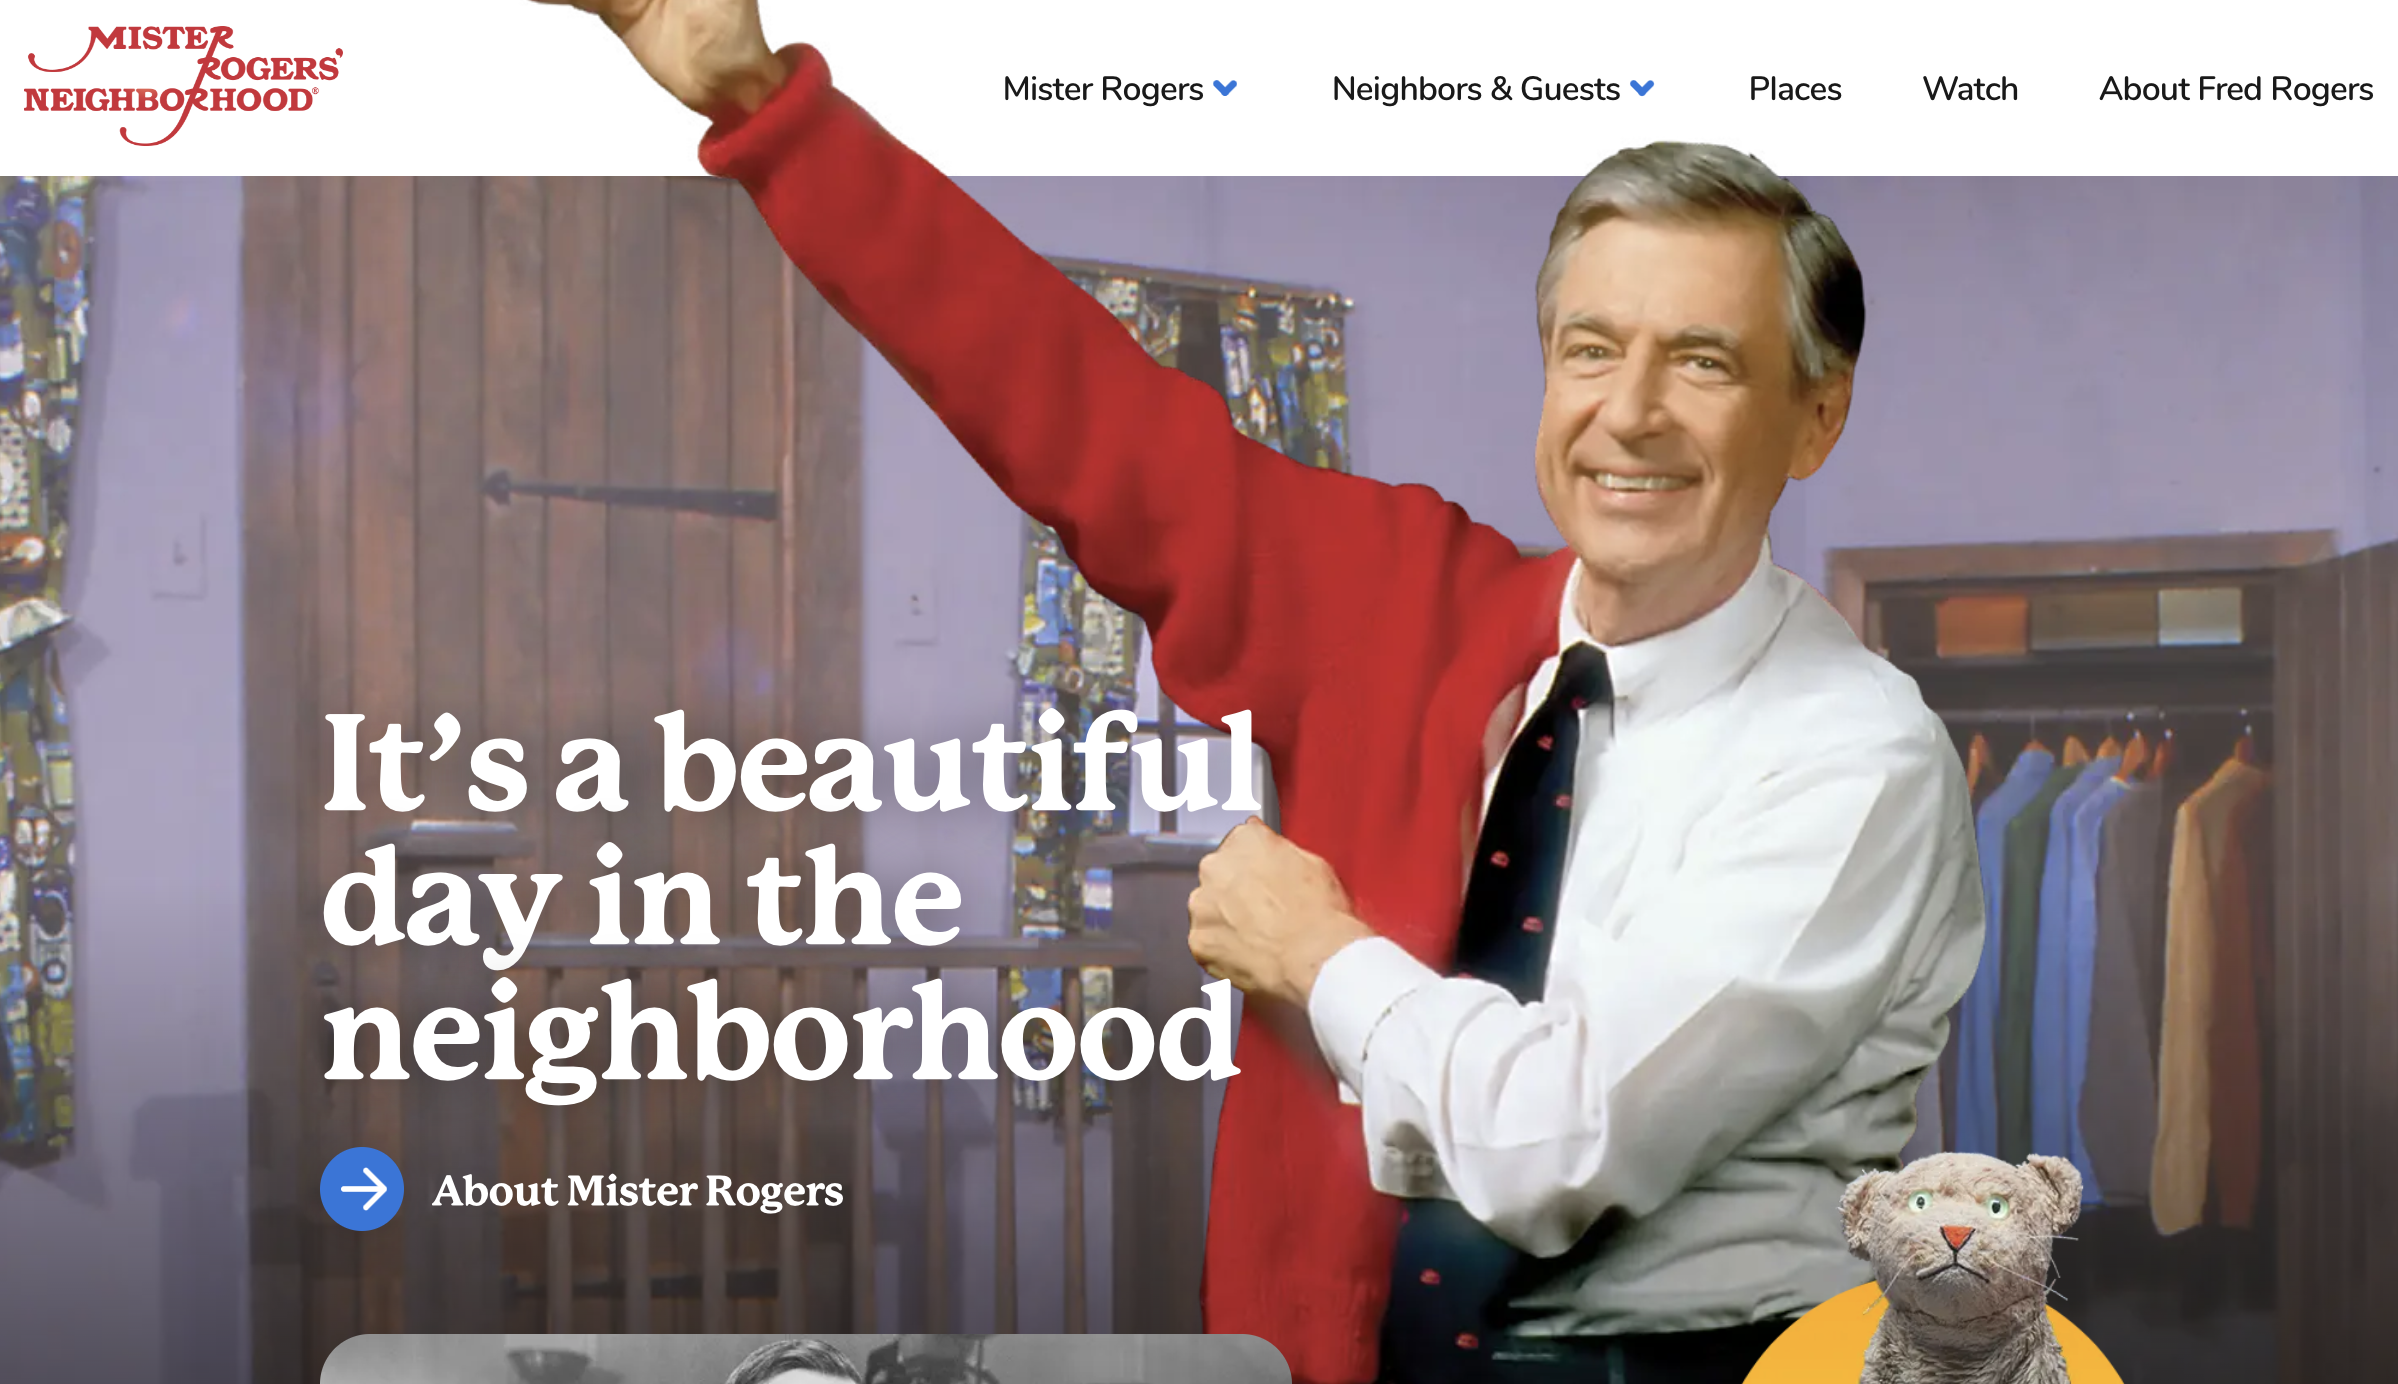 image shows a screenshot of the mr. rogers website